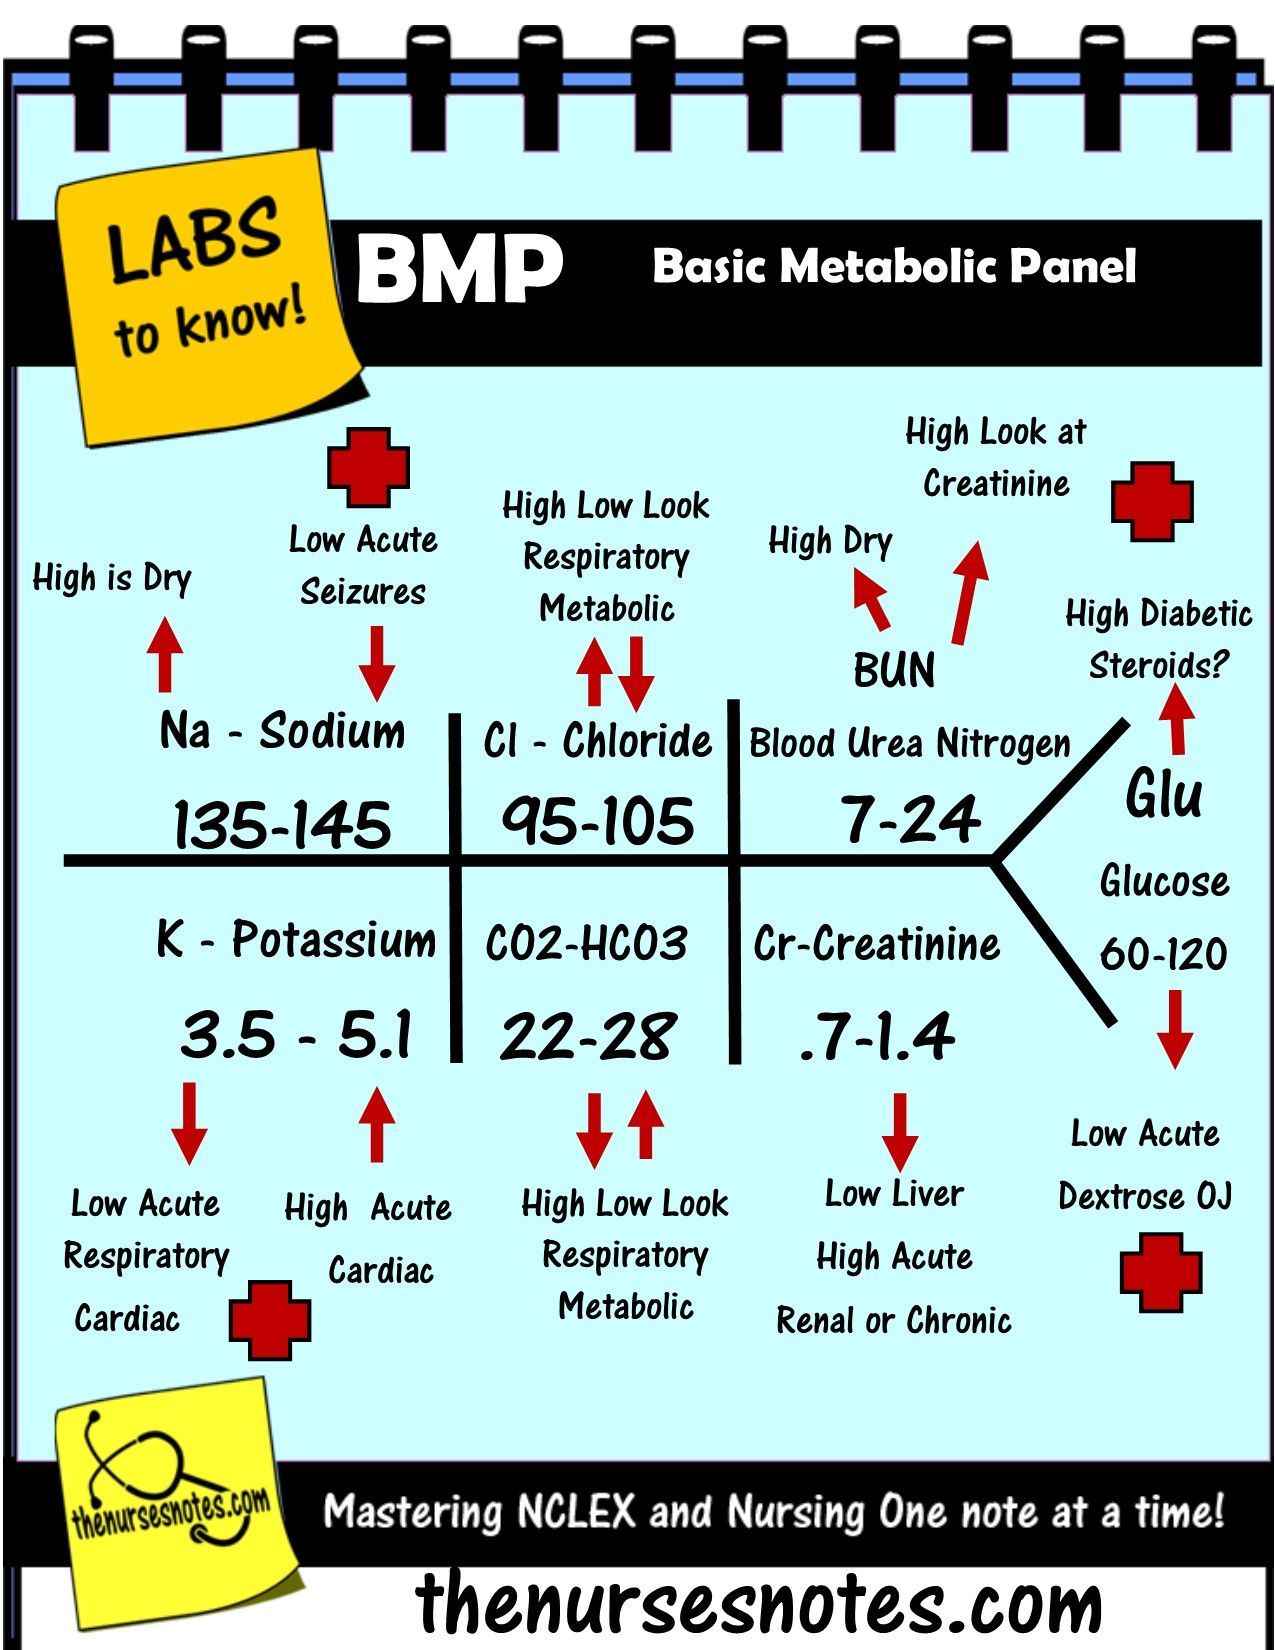 BMP Chem7 Fishbone Diagram explaining labs – From the Blood Book Theses are the Labs you should know H